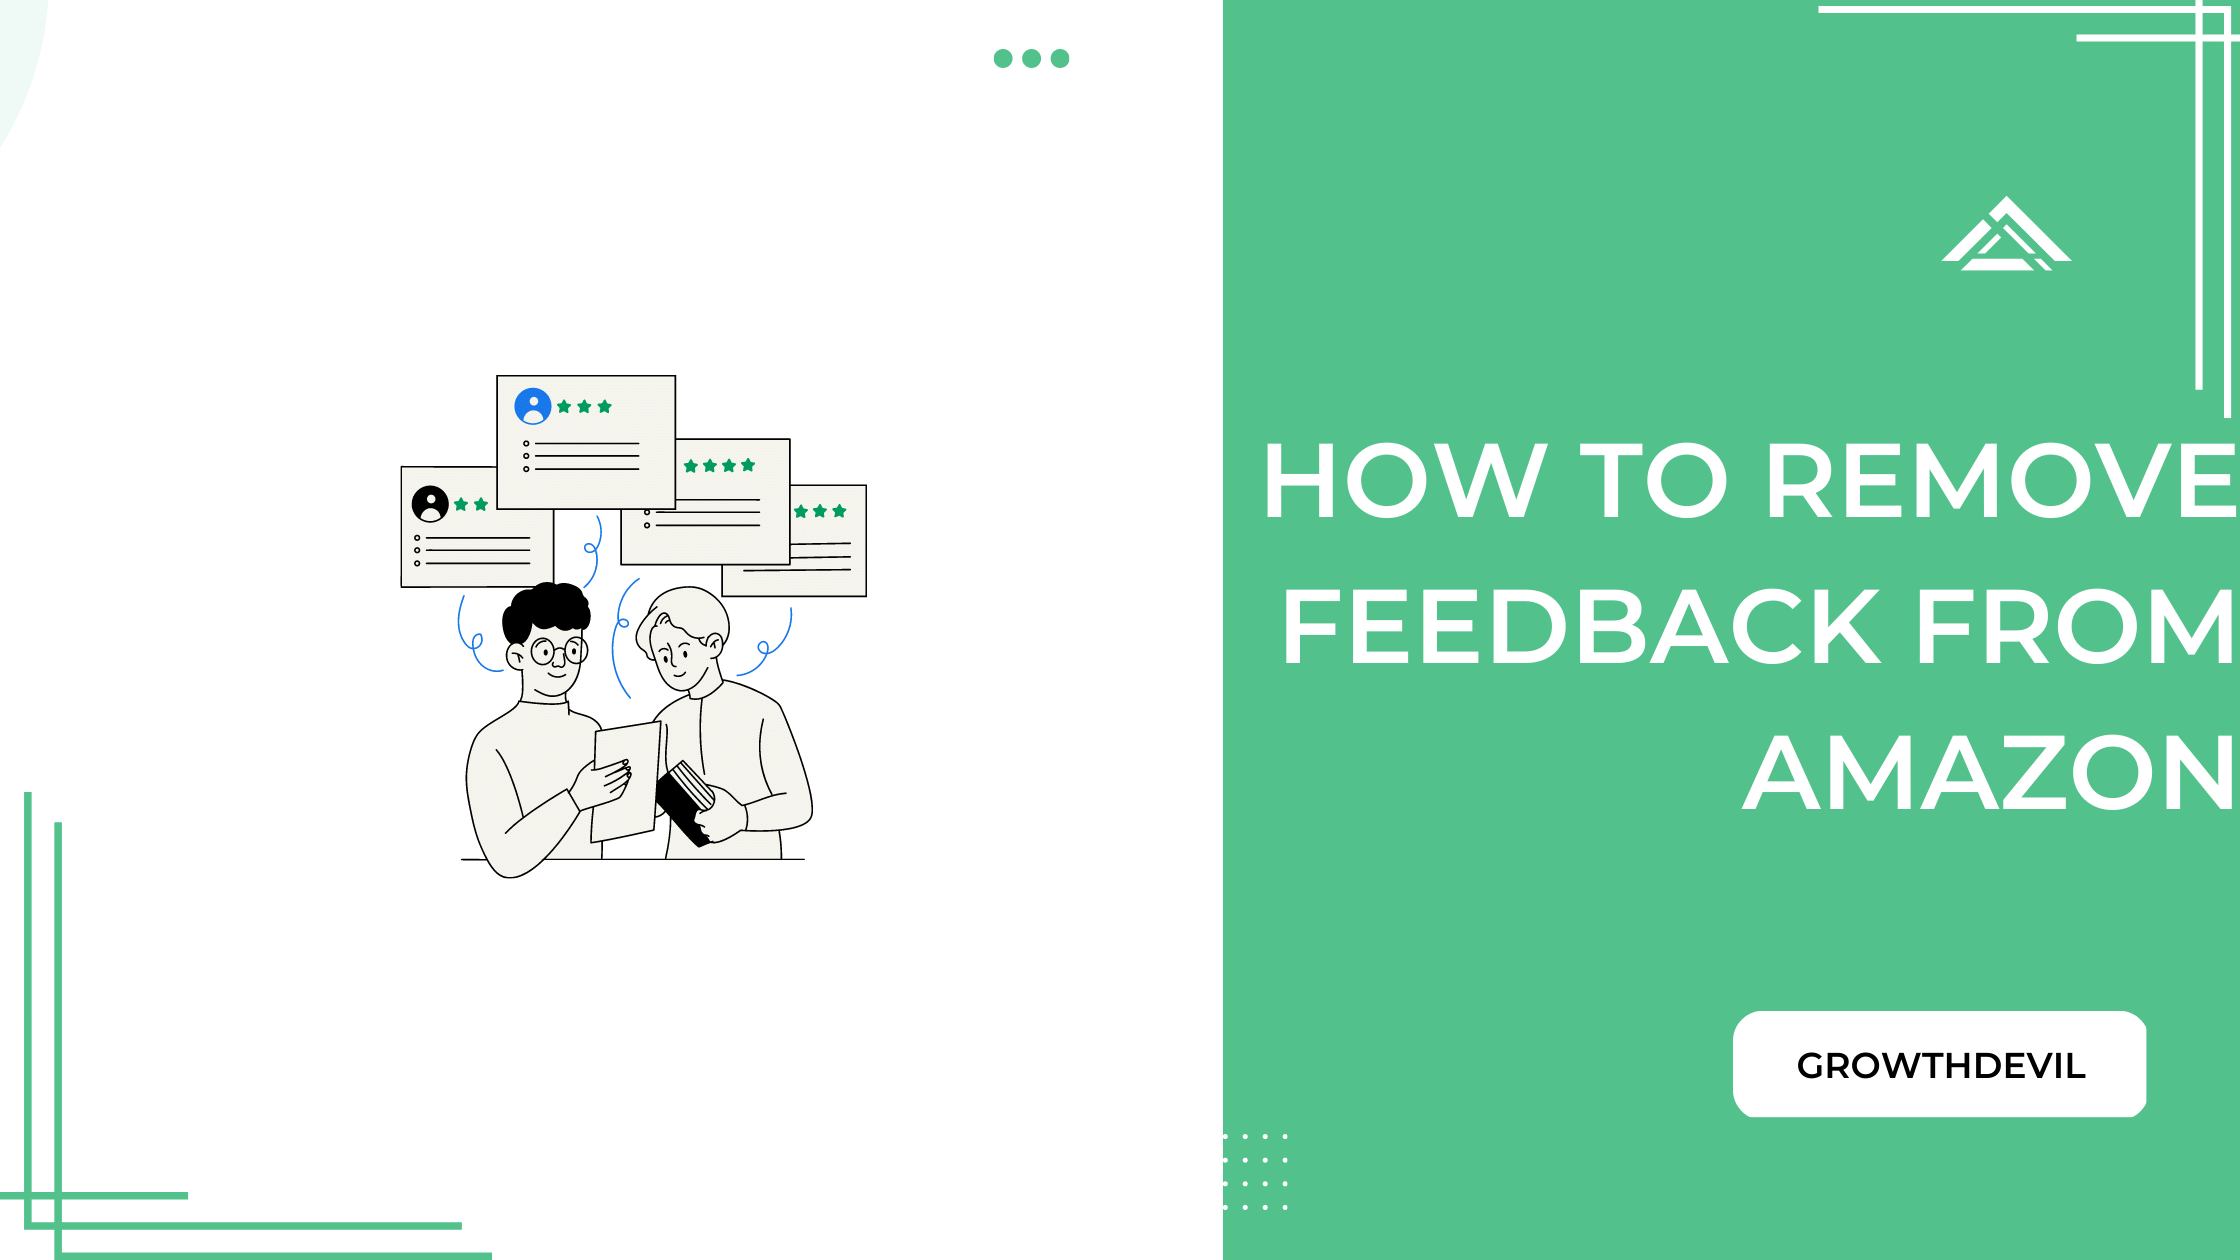 How To Remove Feedback From Amazon - GrowthDevil